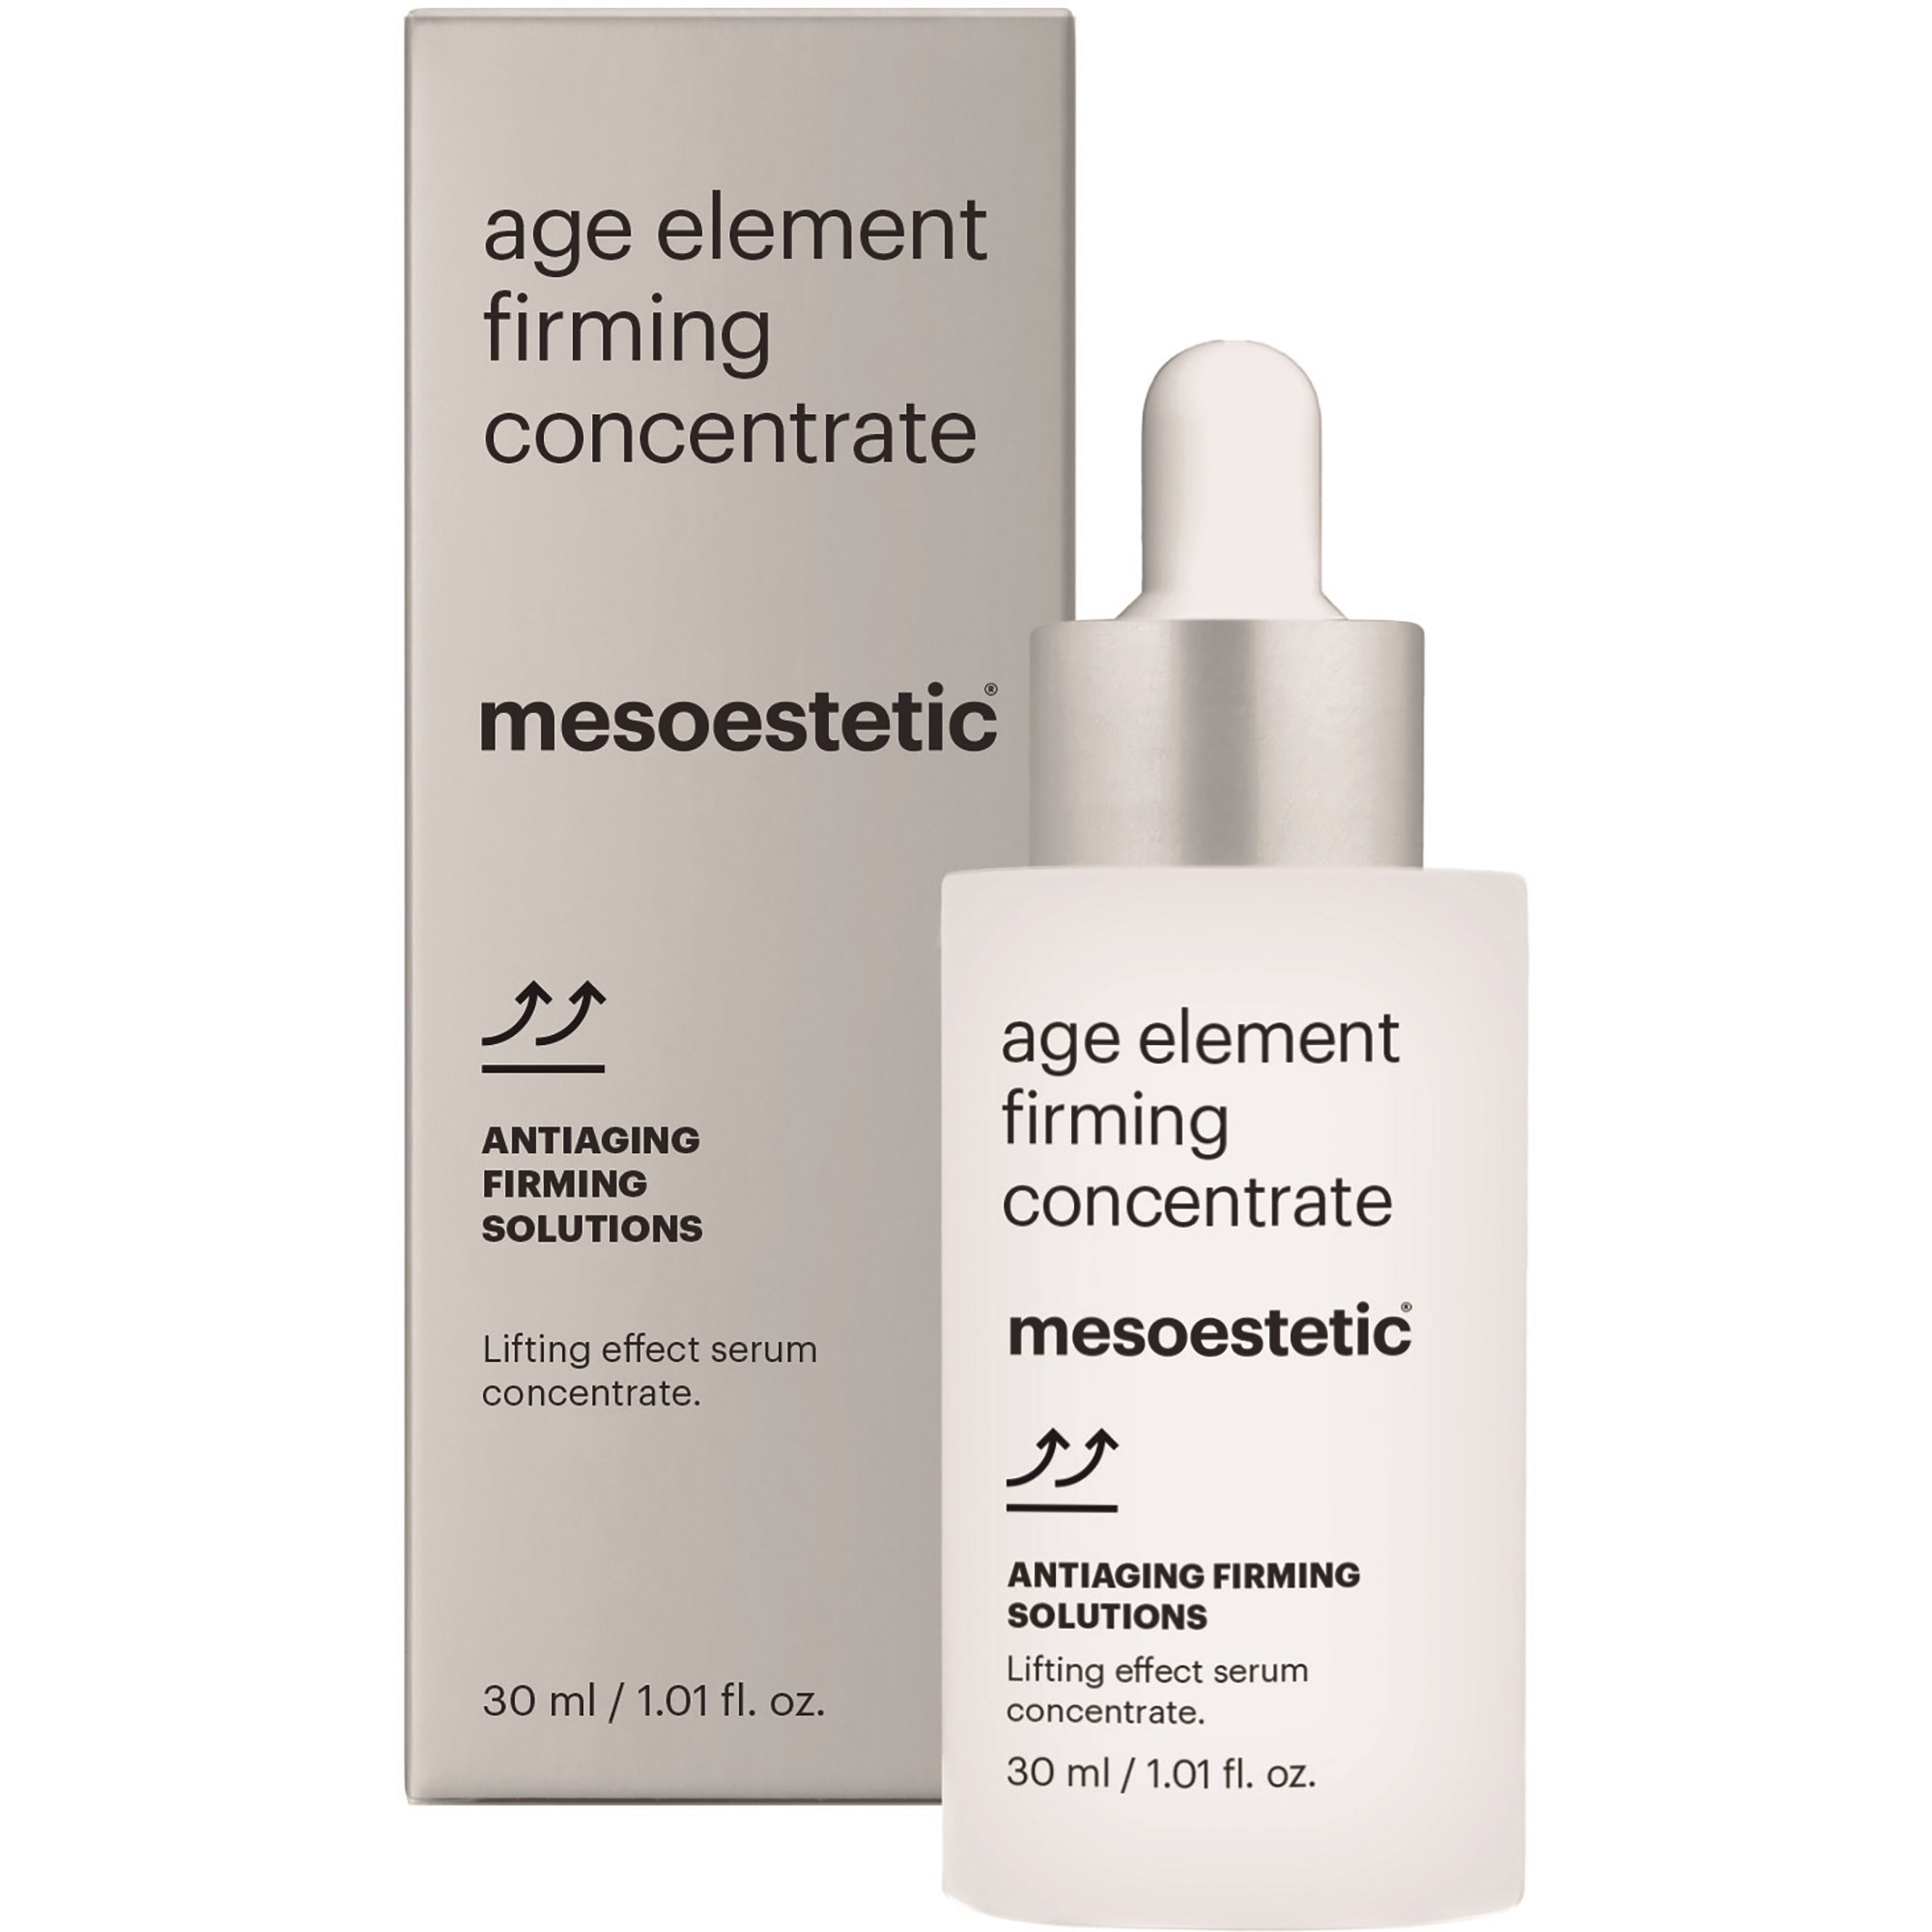 Läs mer om Mesoestetic Age Element Solutions Firming Concentrate